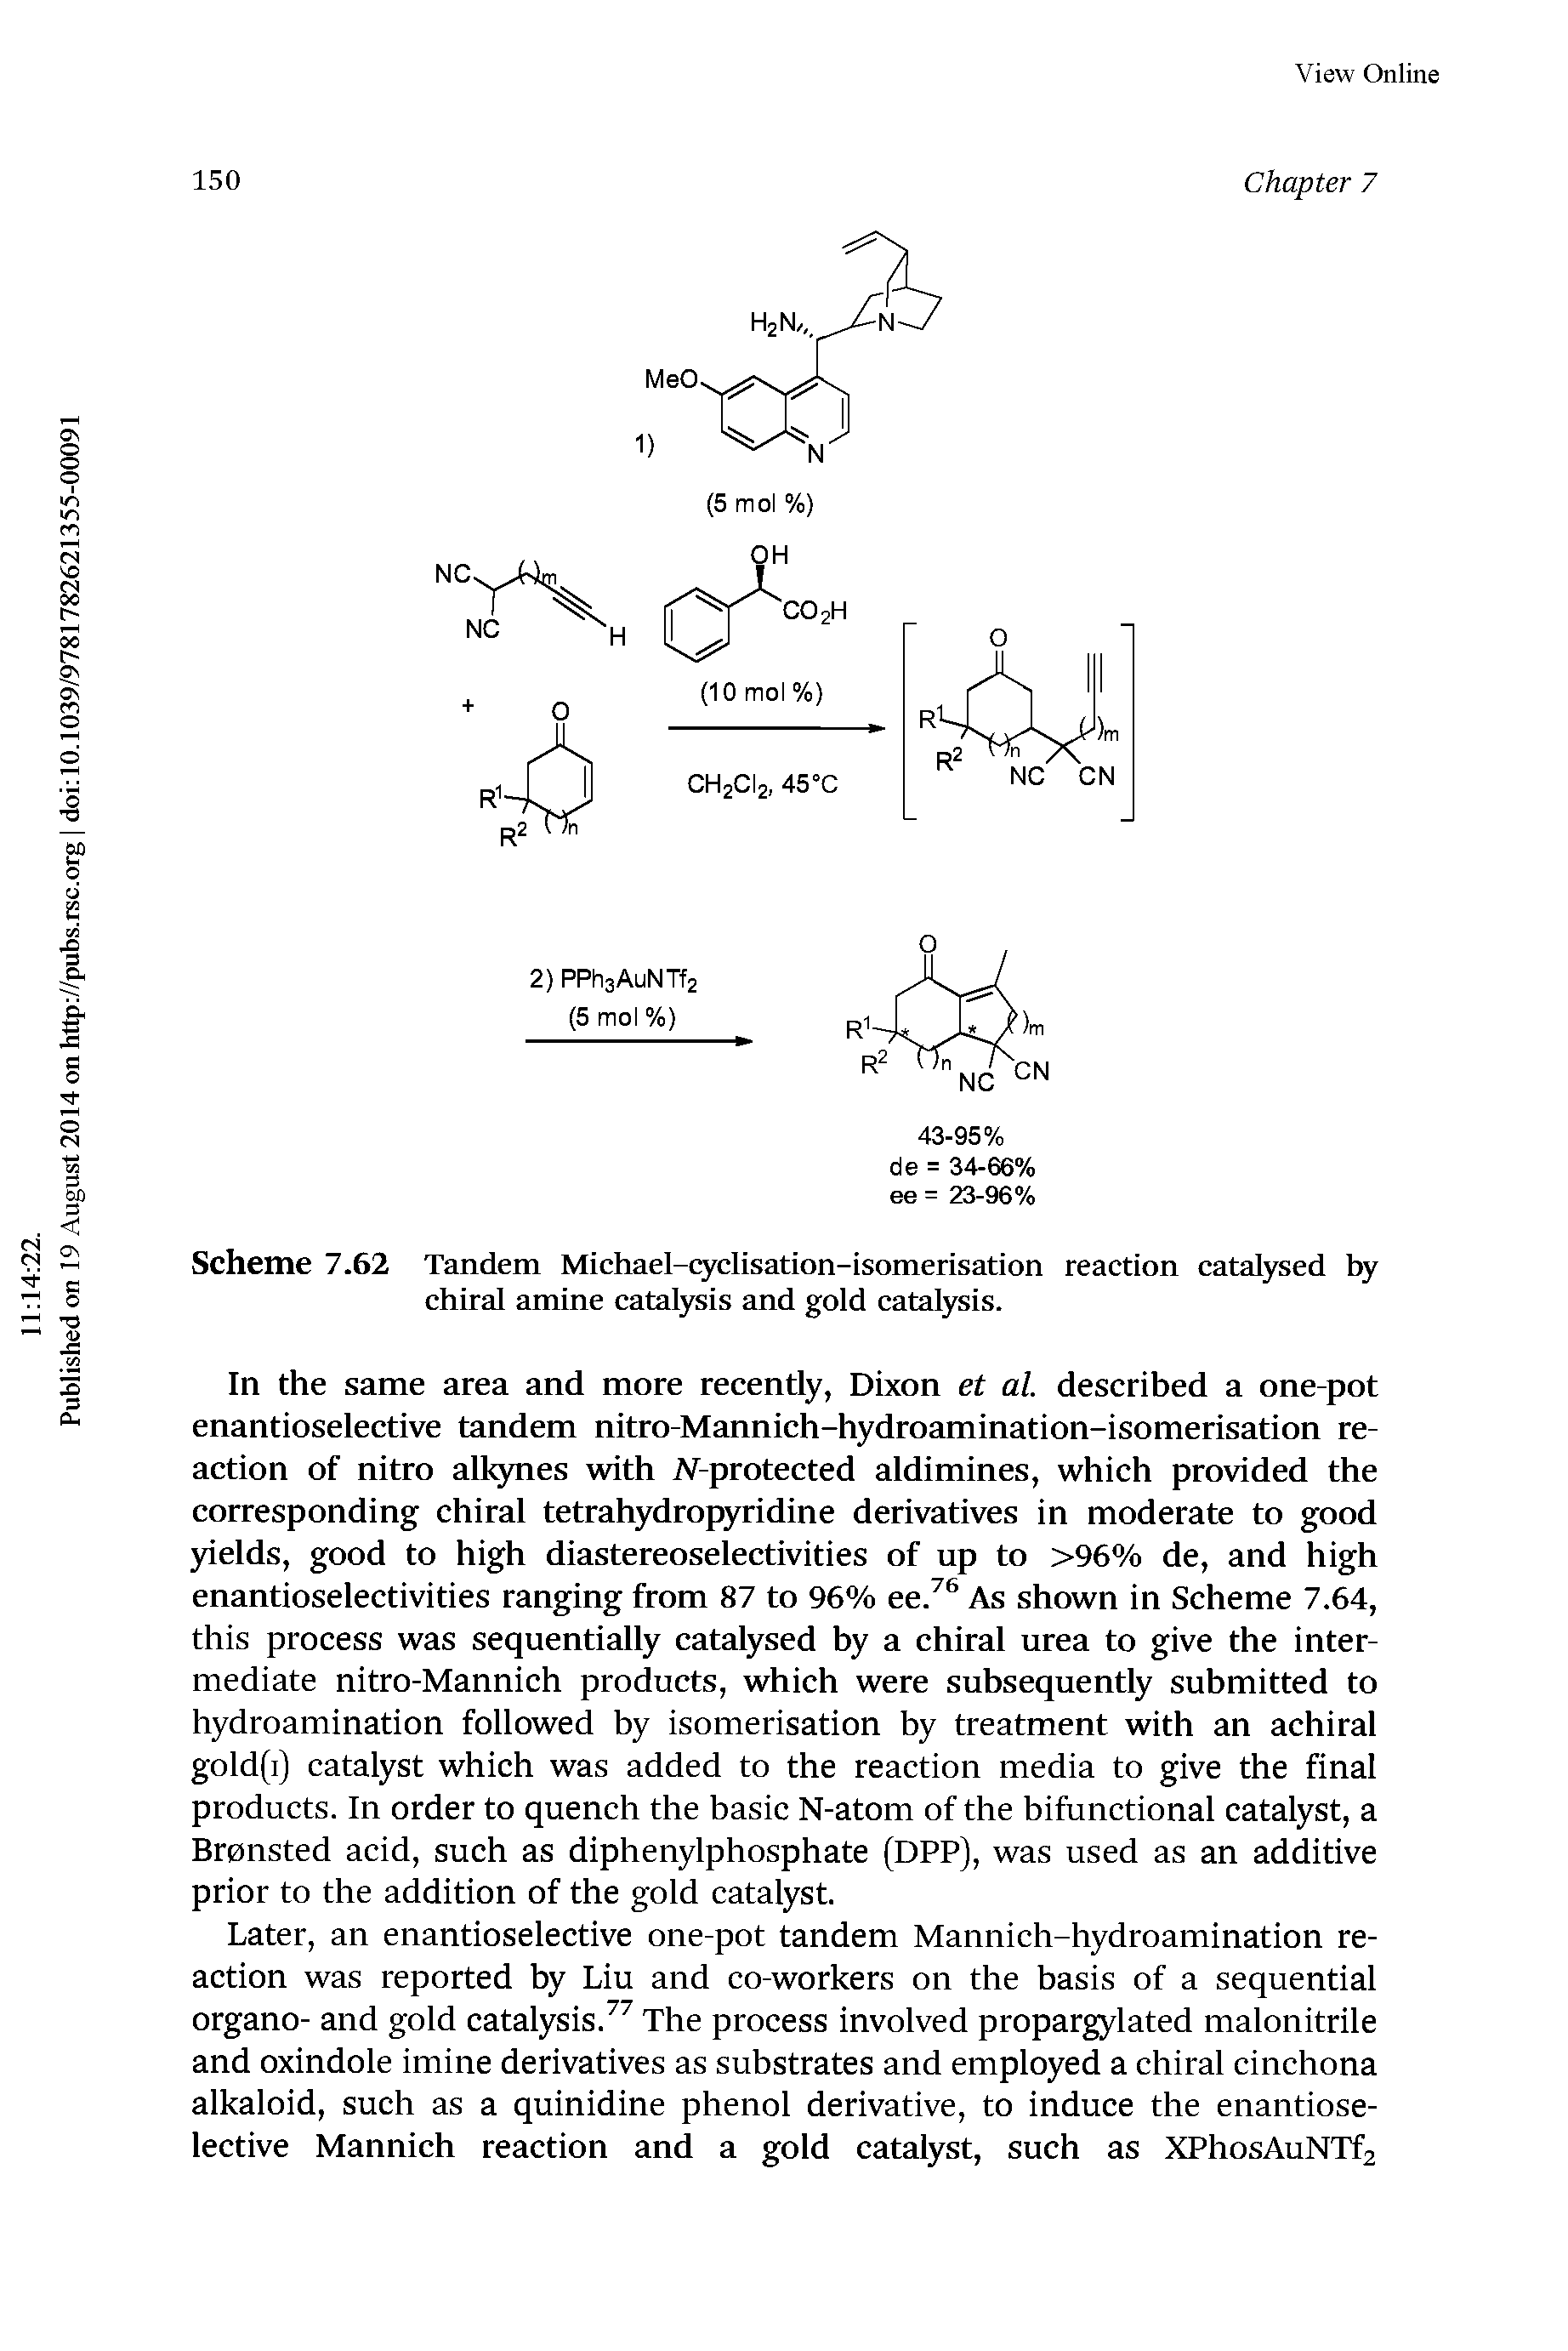 Scheme 7.62 Tandem Michael-q clisation-isomerisation reaction catatysed by chiral amine catalysis and gold catalysis.